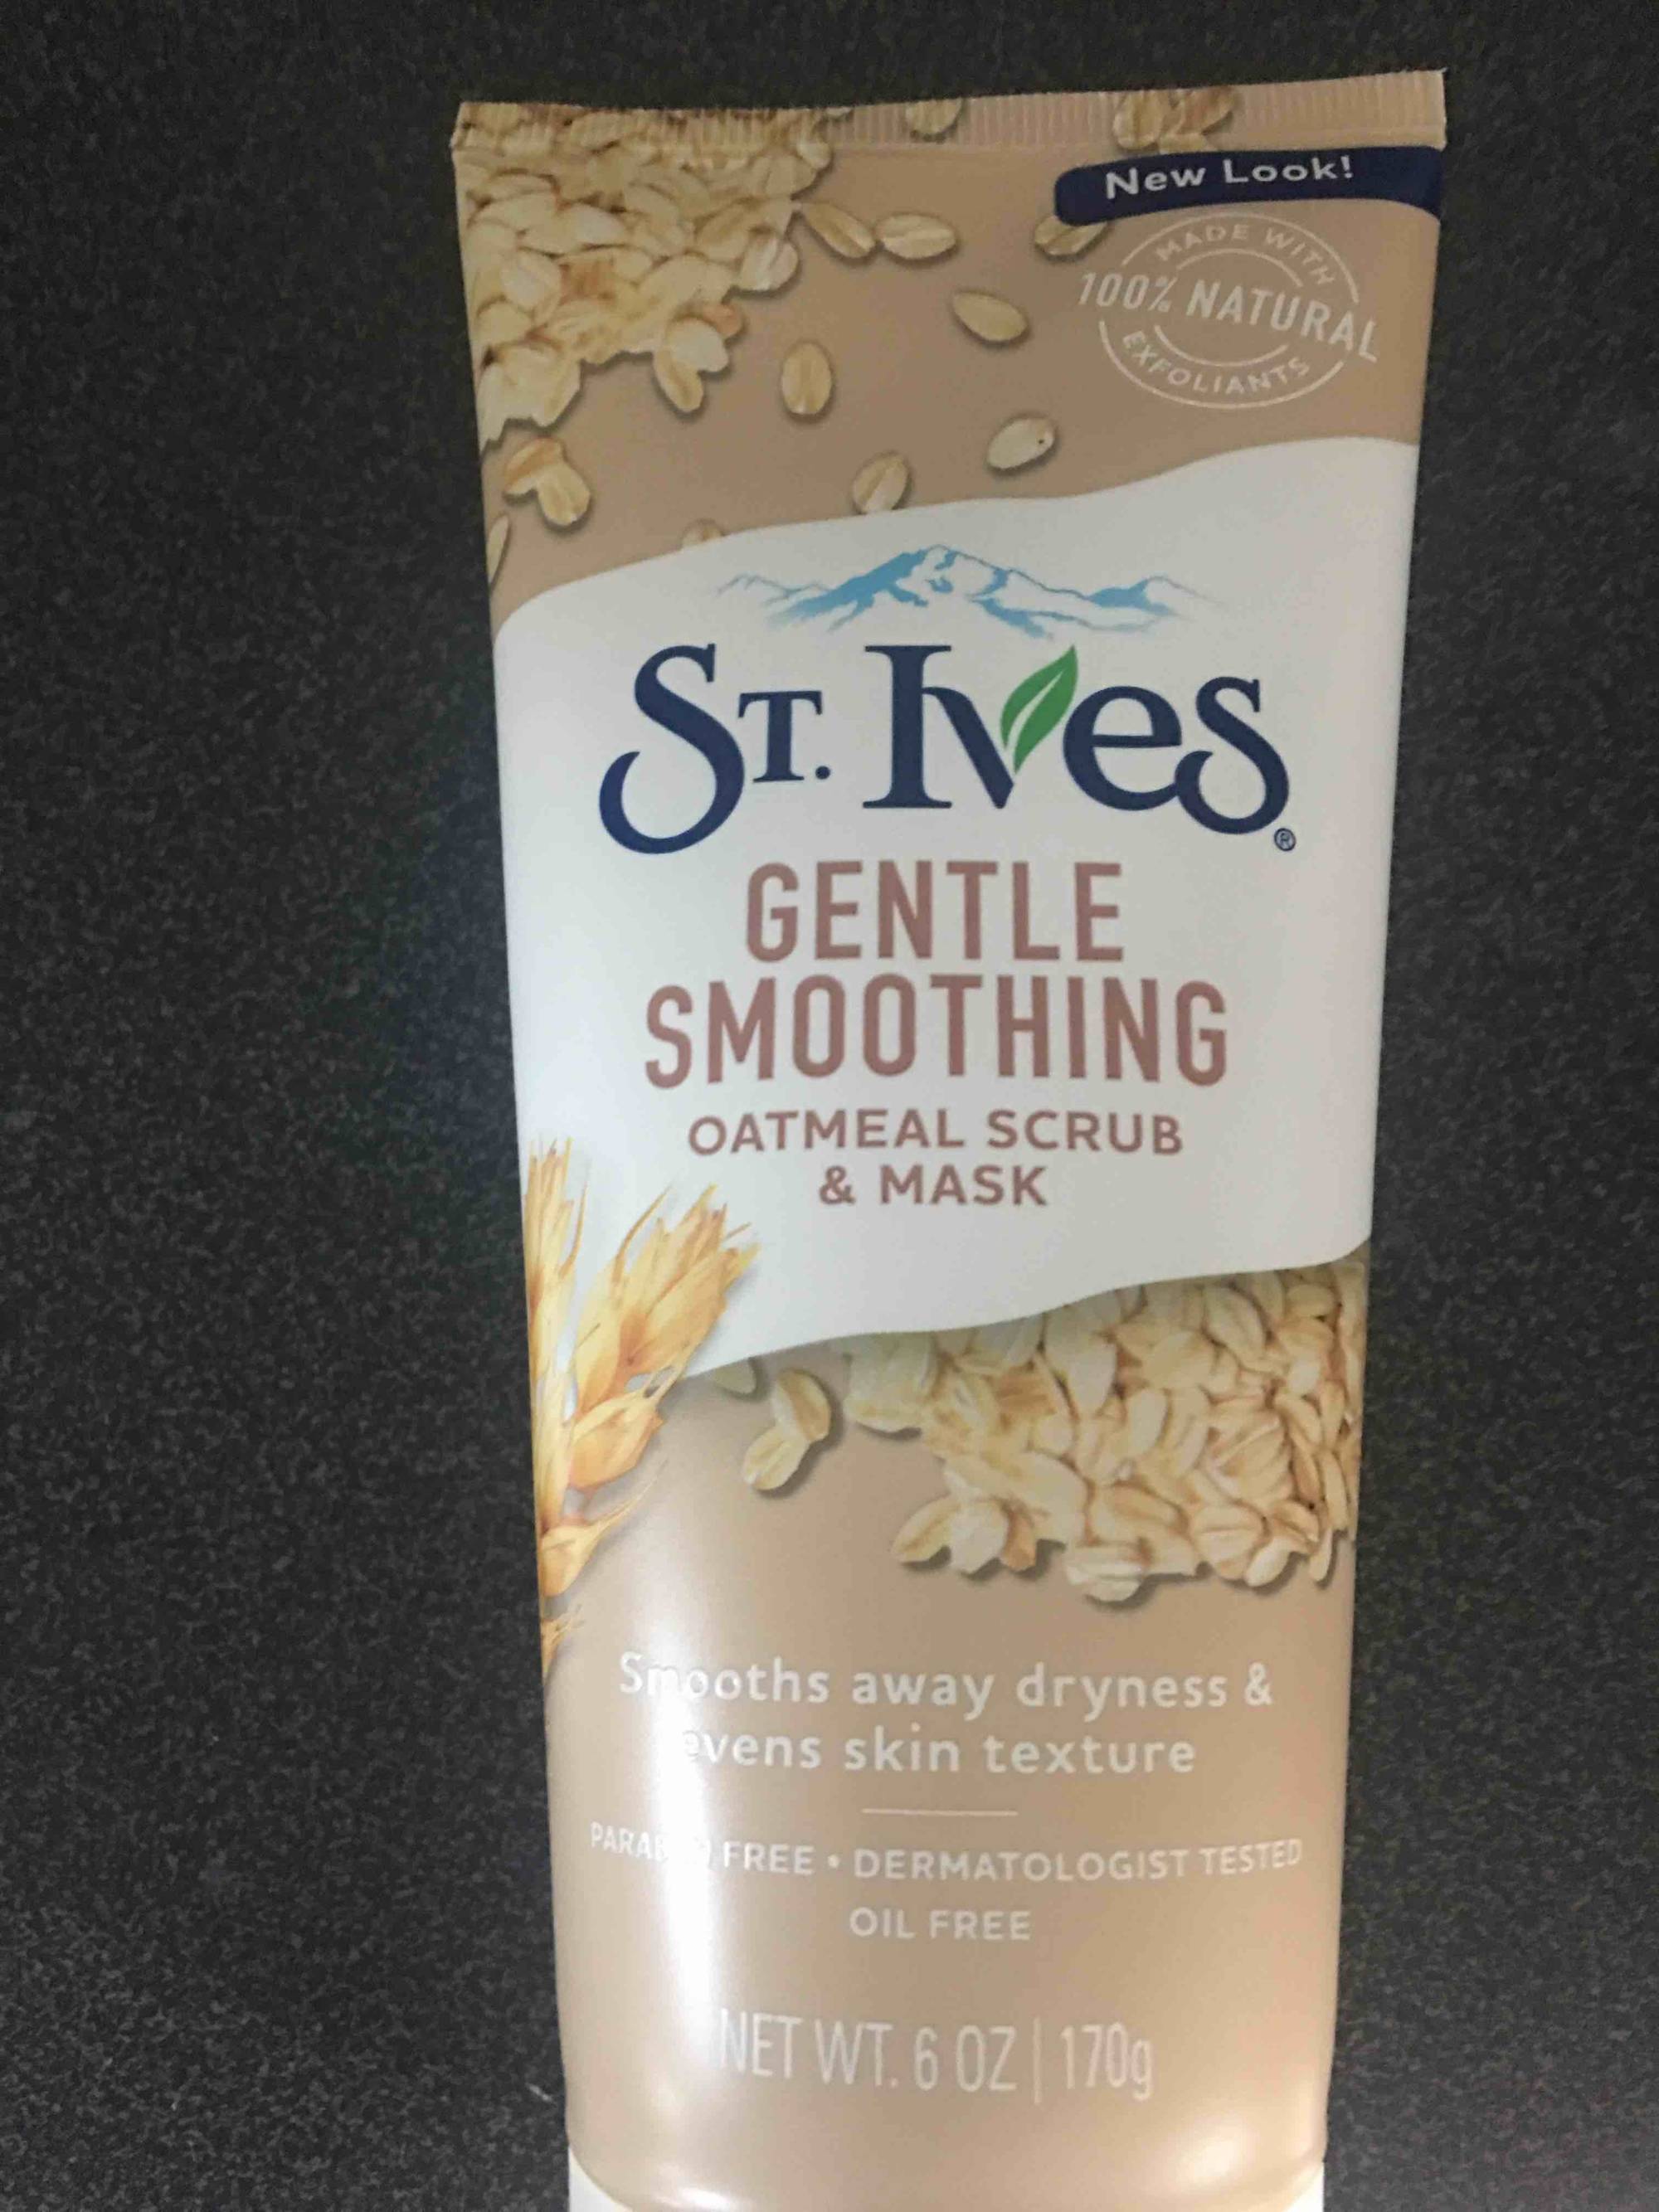 ST IVES - Gentle smoothing - Oatmeal scrub & mask